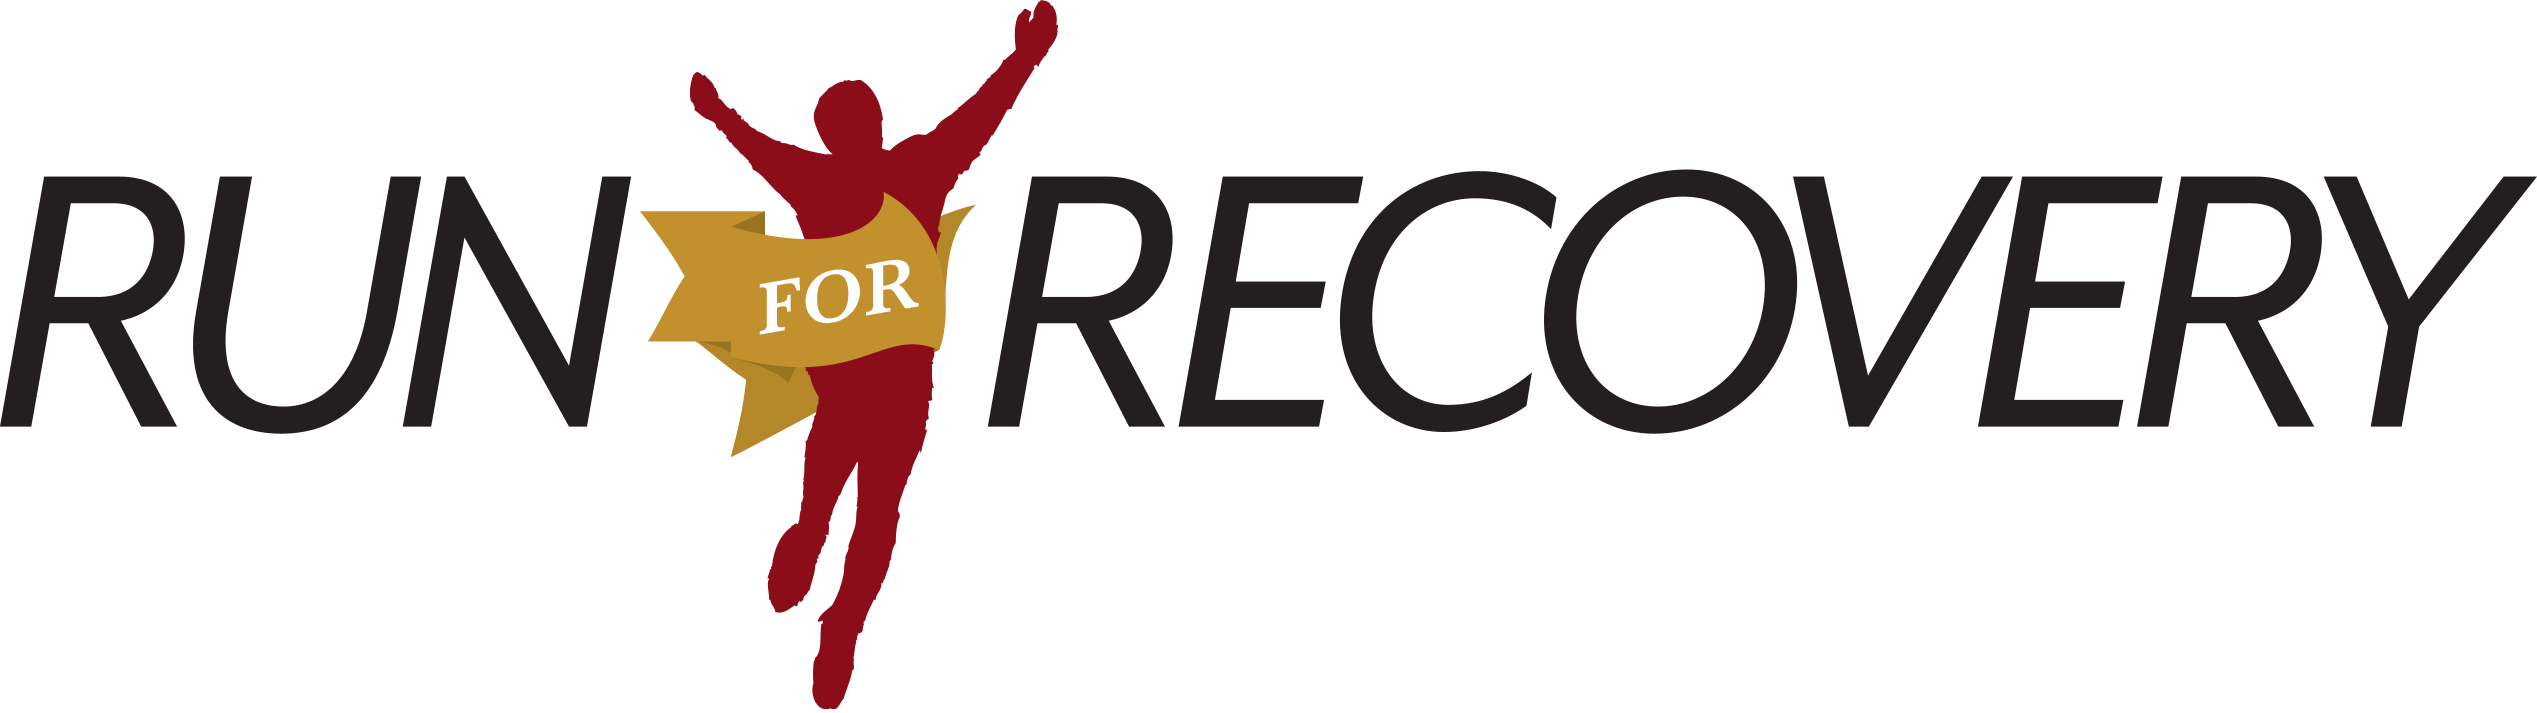 run for recovery logo